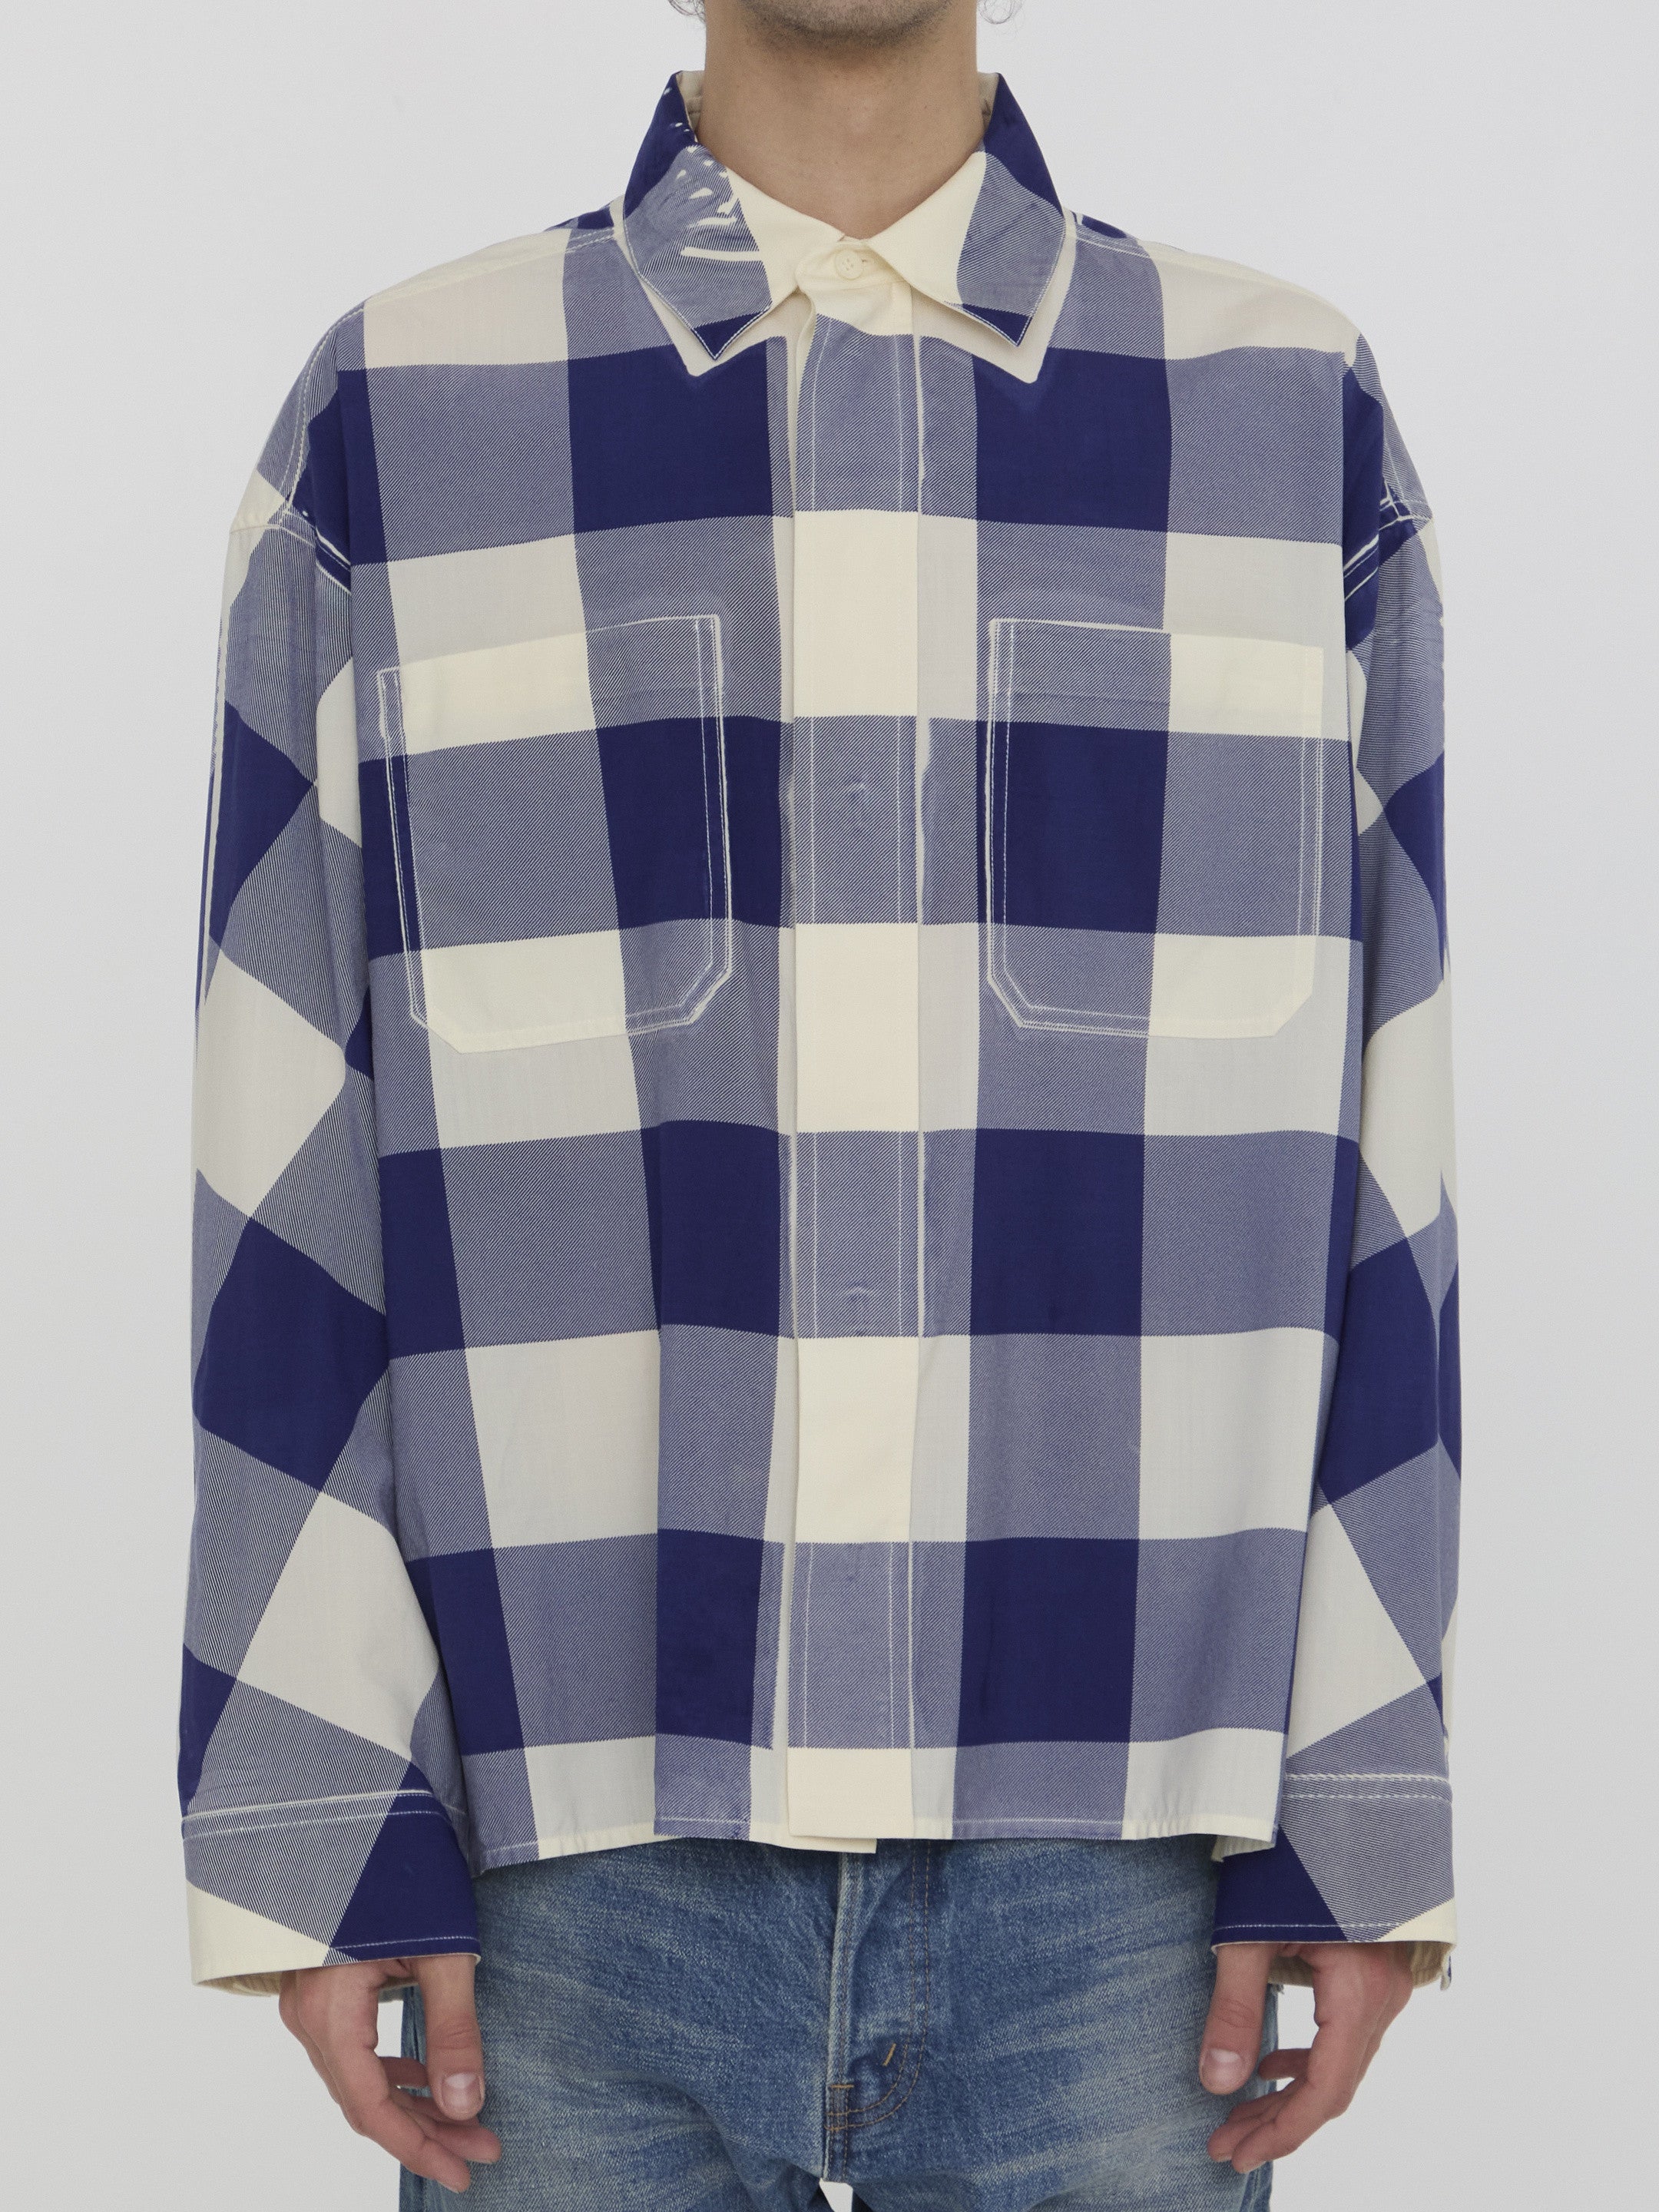 LOEWE-OUTLET-SALE-Checked-shirt-Shirts-39-WHITE-ARCHIVE-COLLECTION.jpg